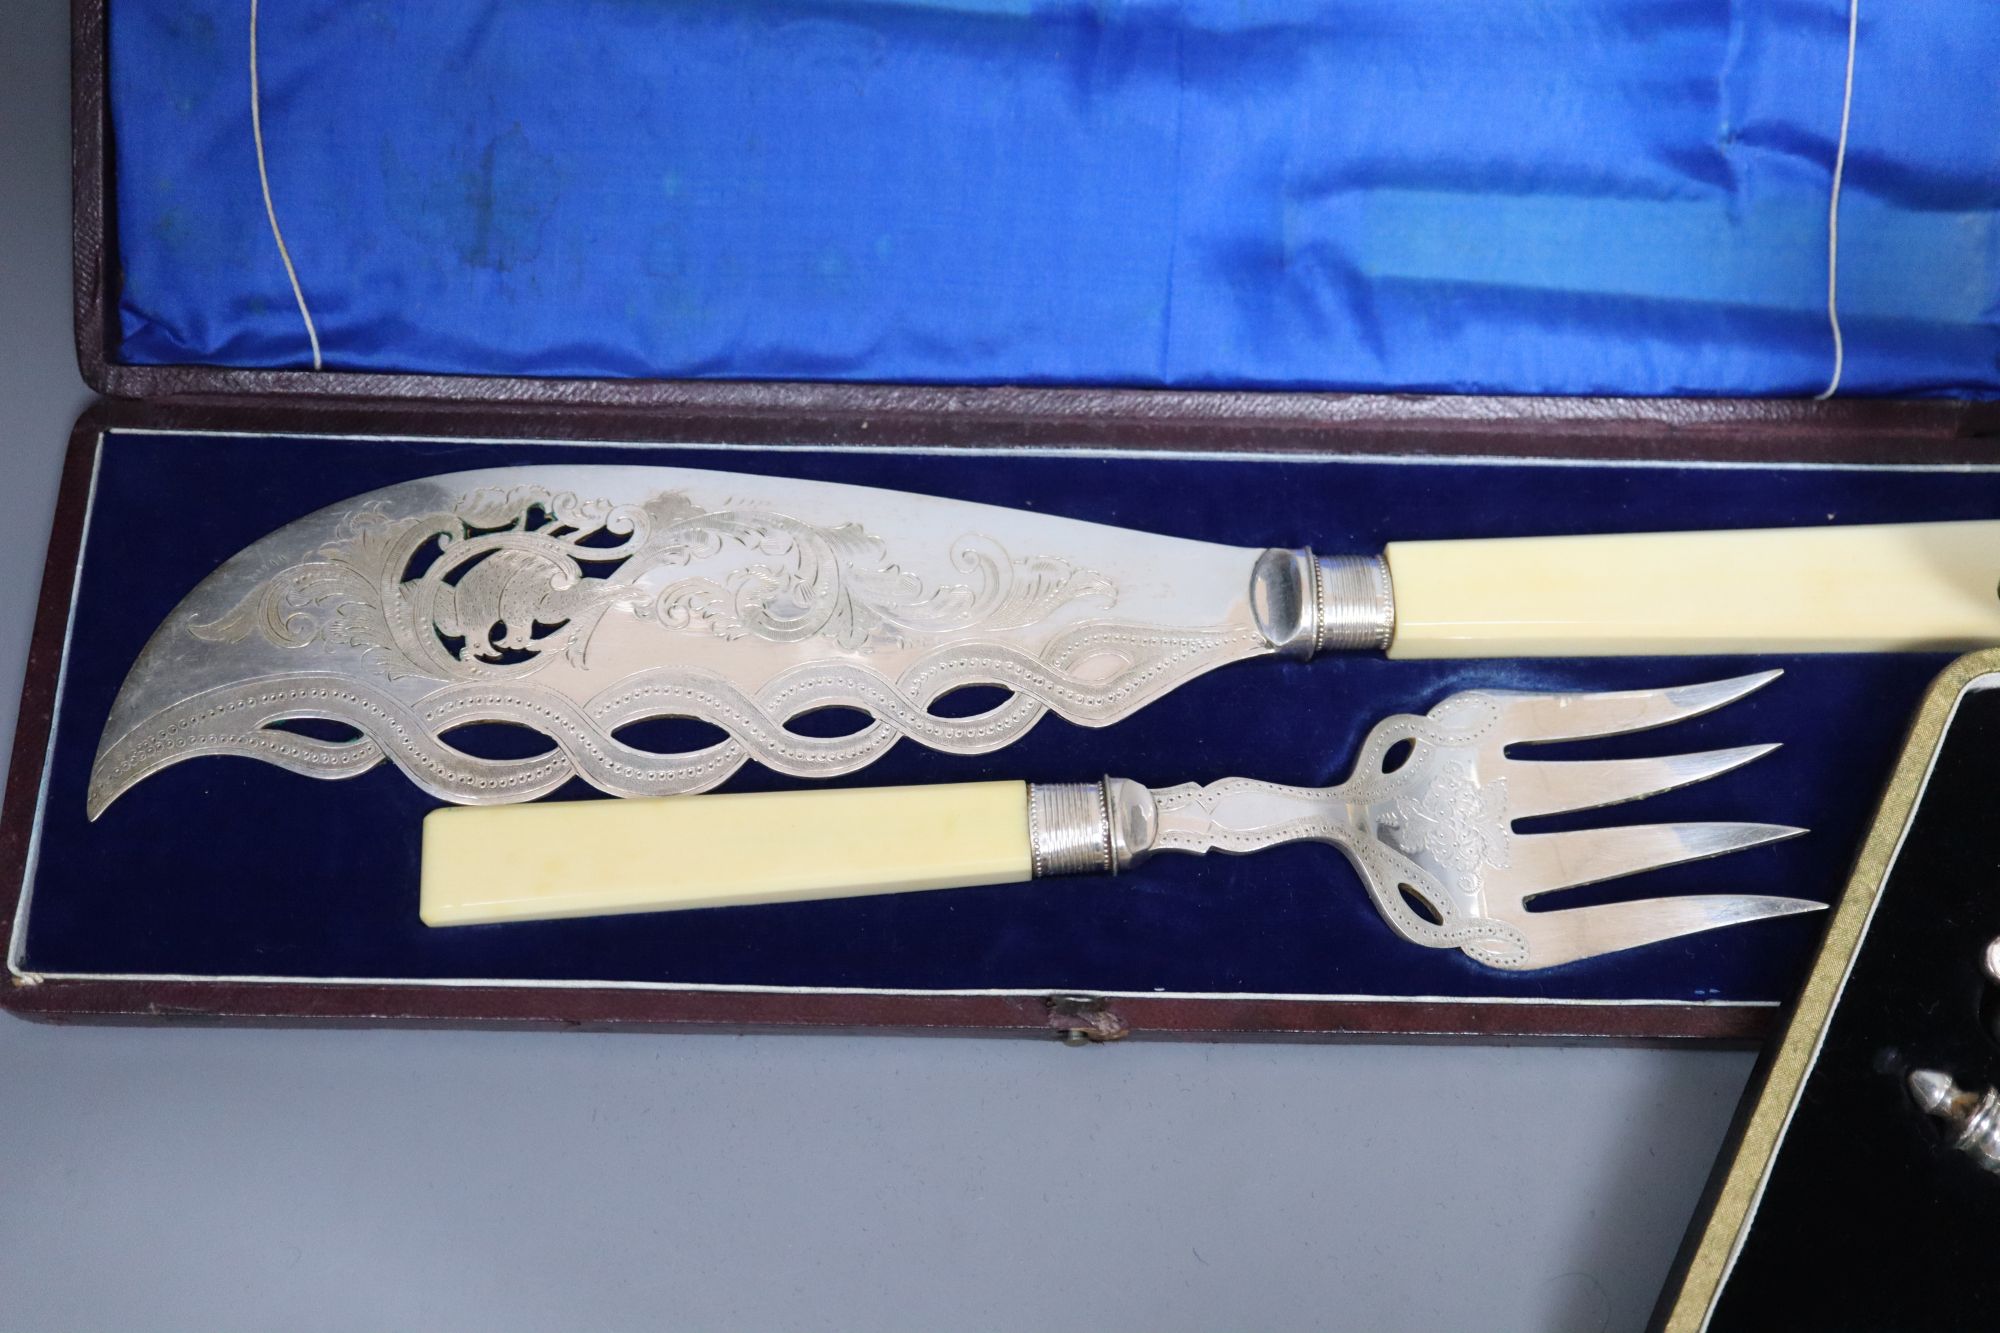 A pair of plated engraved bone handled fish servers, cased and a set of nut crackers, cased and assorted plated flatware.